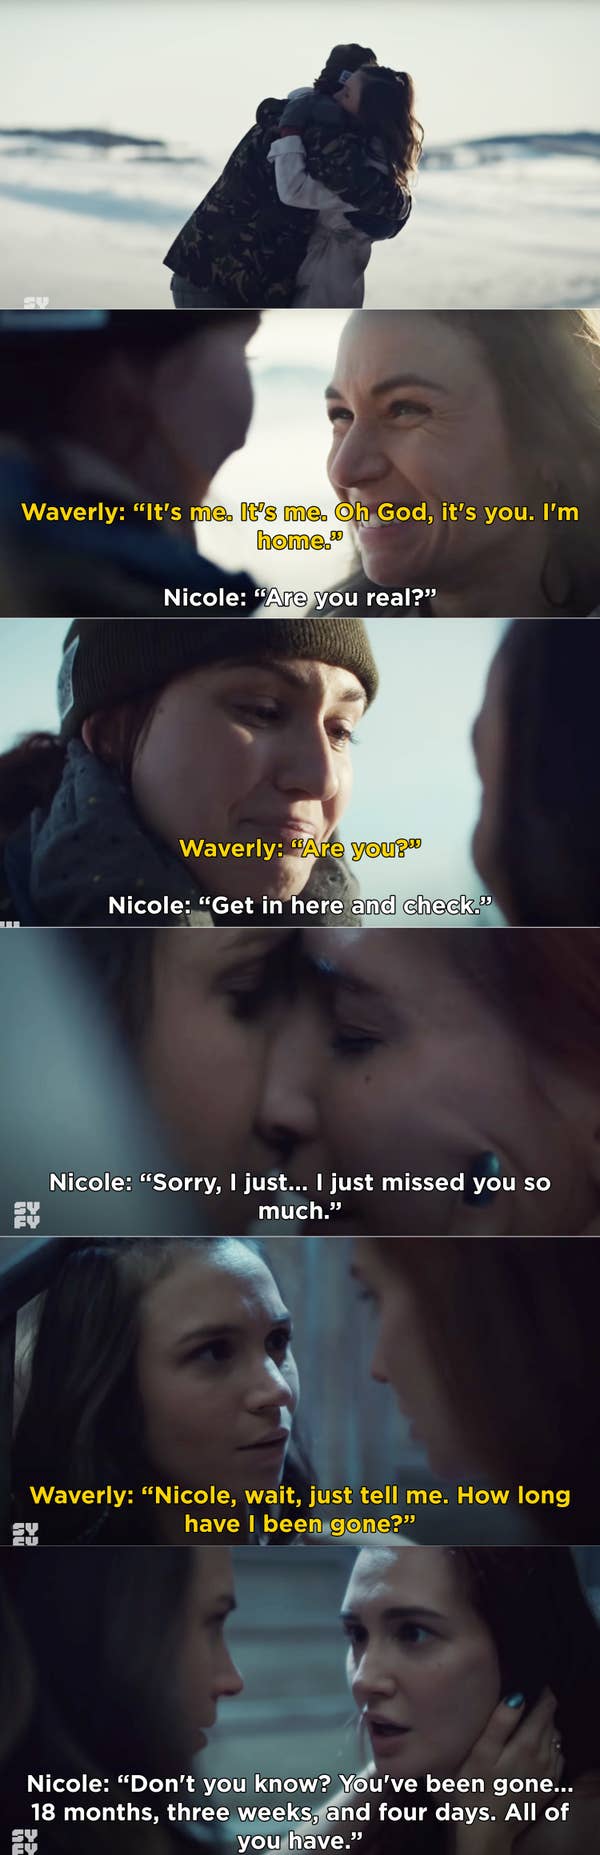 Nicole telling Waverly, &quot;Don&#x27;t you know? You&#x27;ve been gone... 18 months, three weeks, and four days. All of you have&quot;